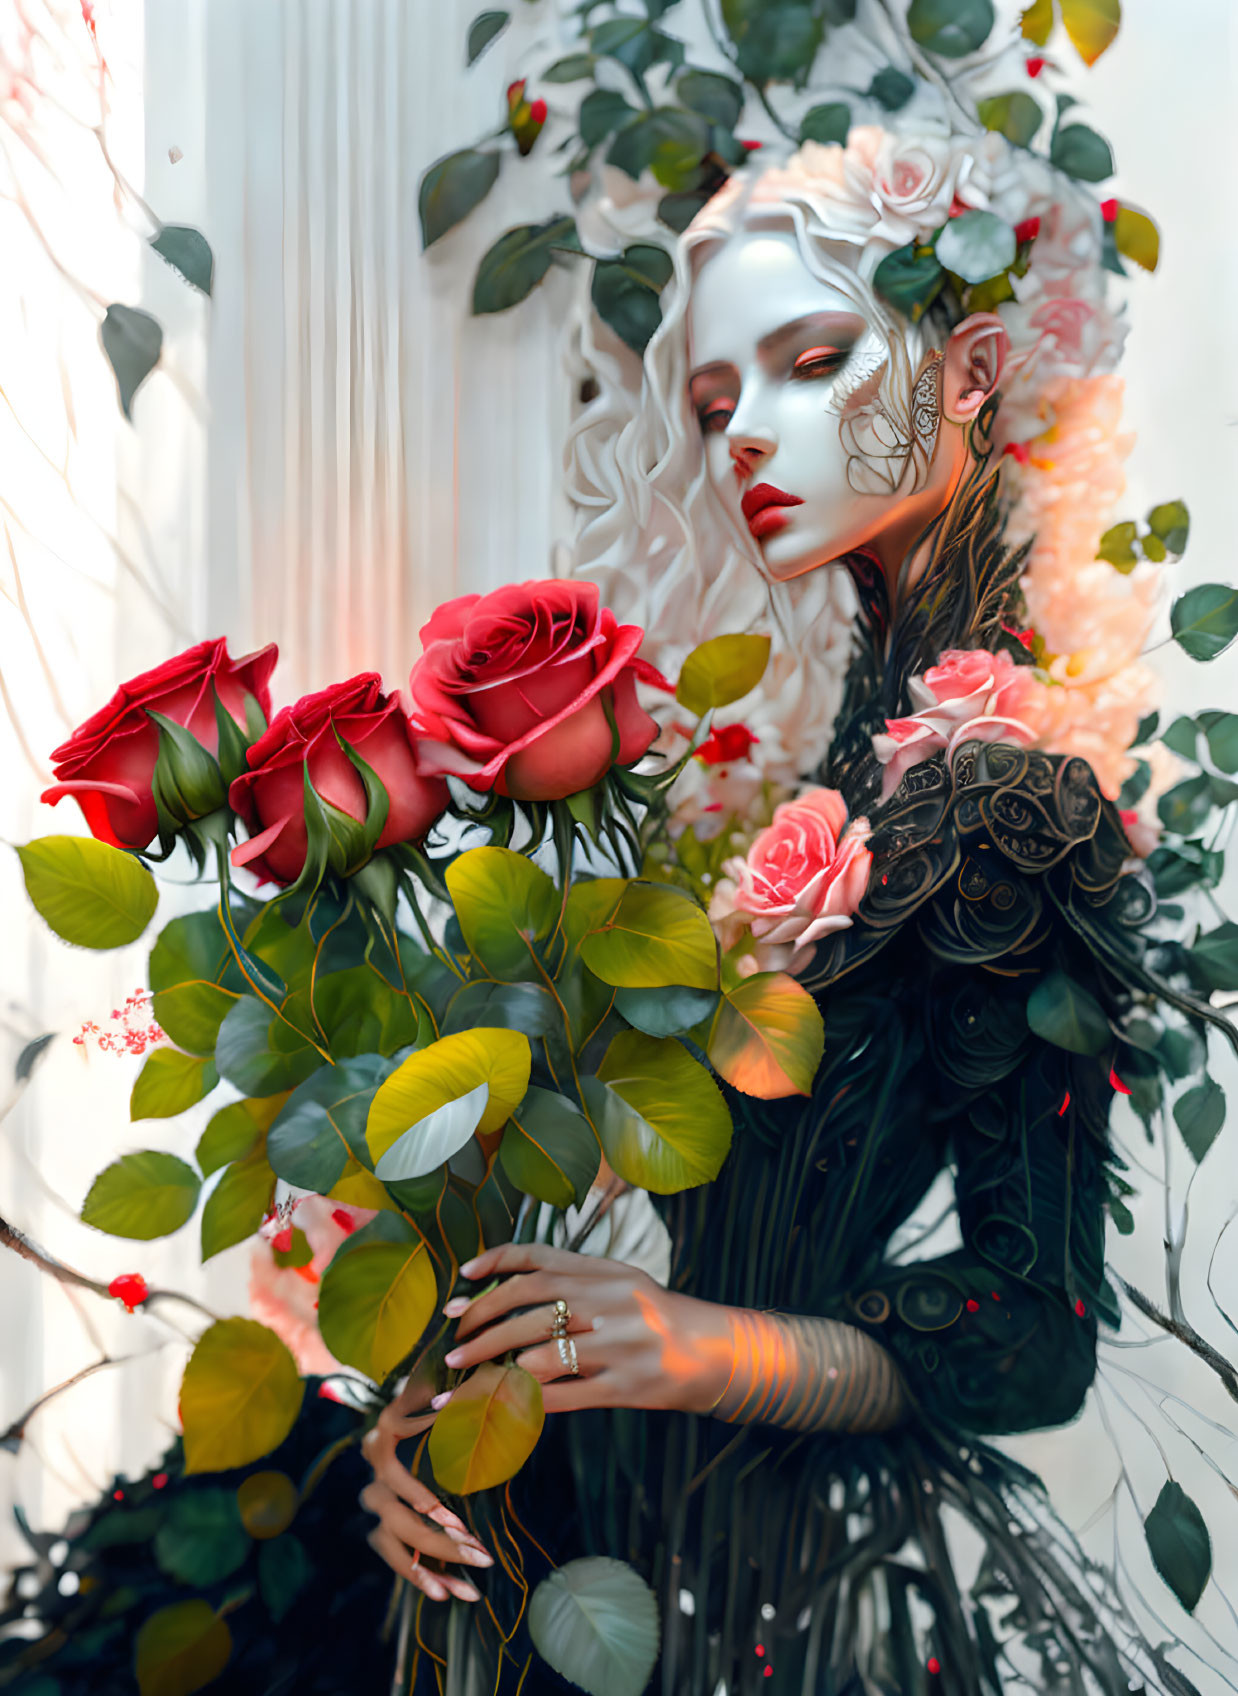 Pale figure with white hair holding red roses and intricate floral attire